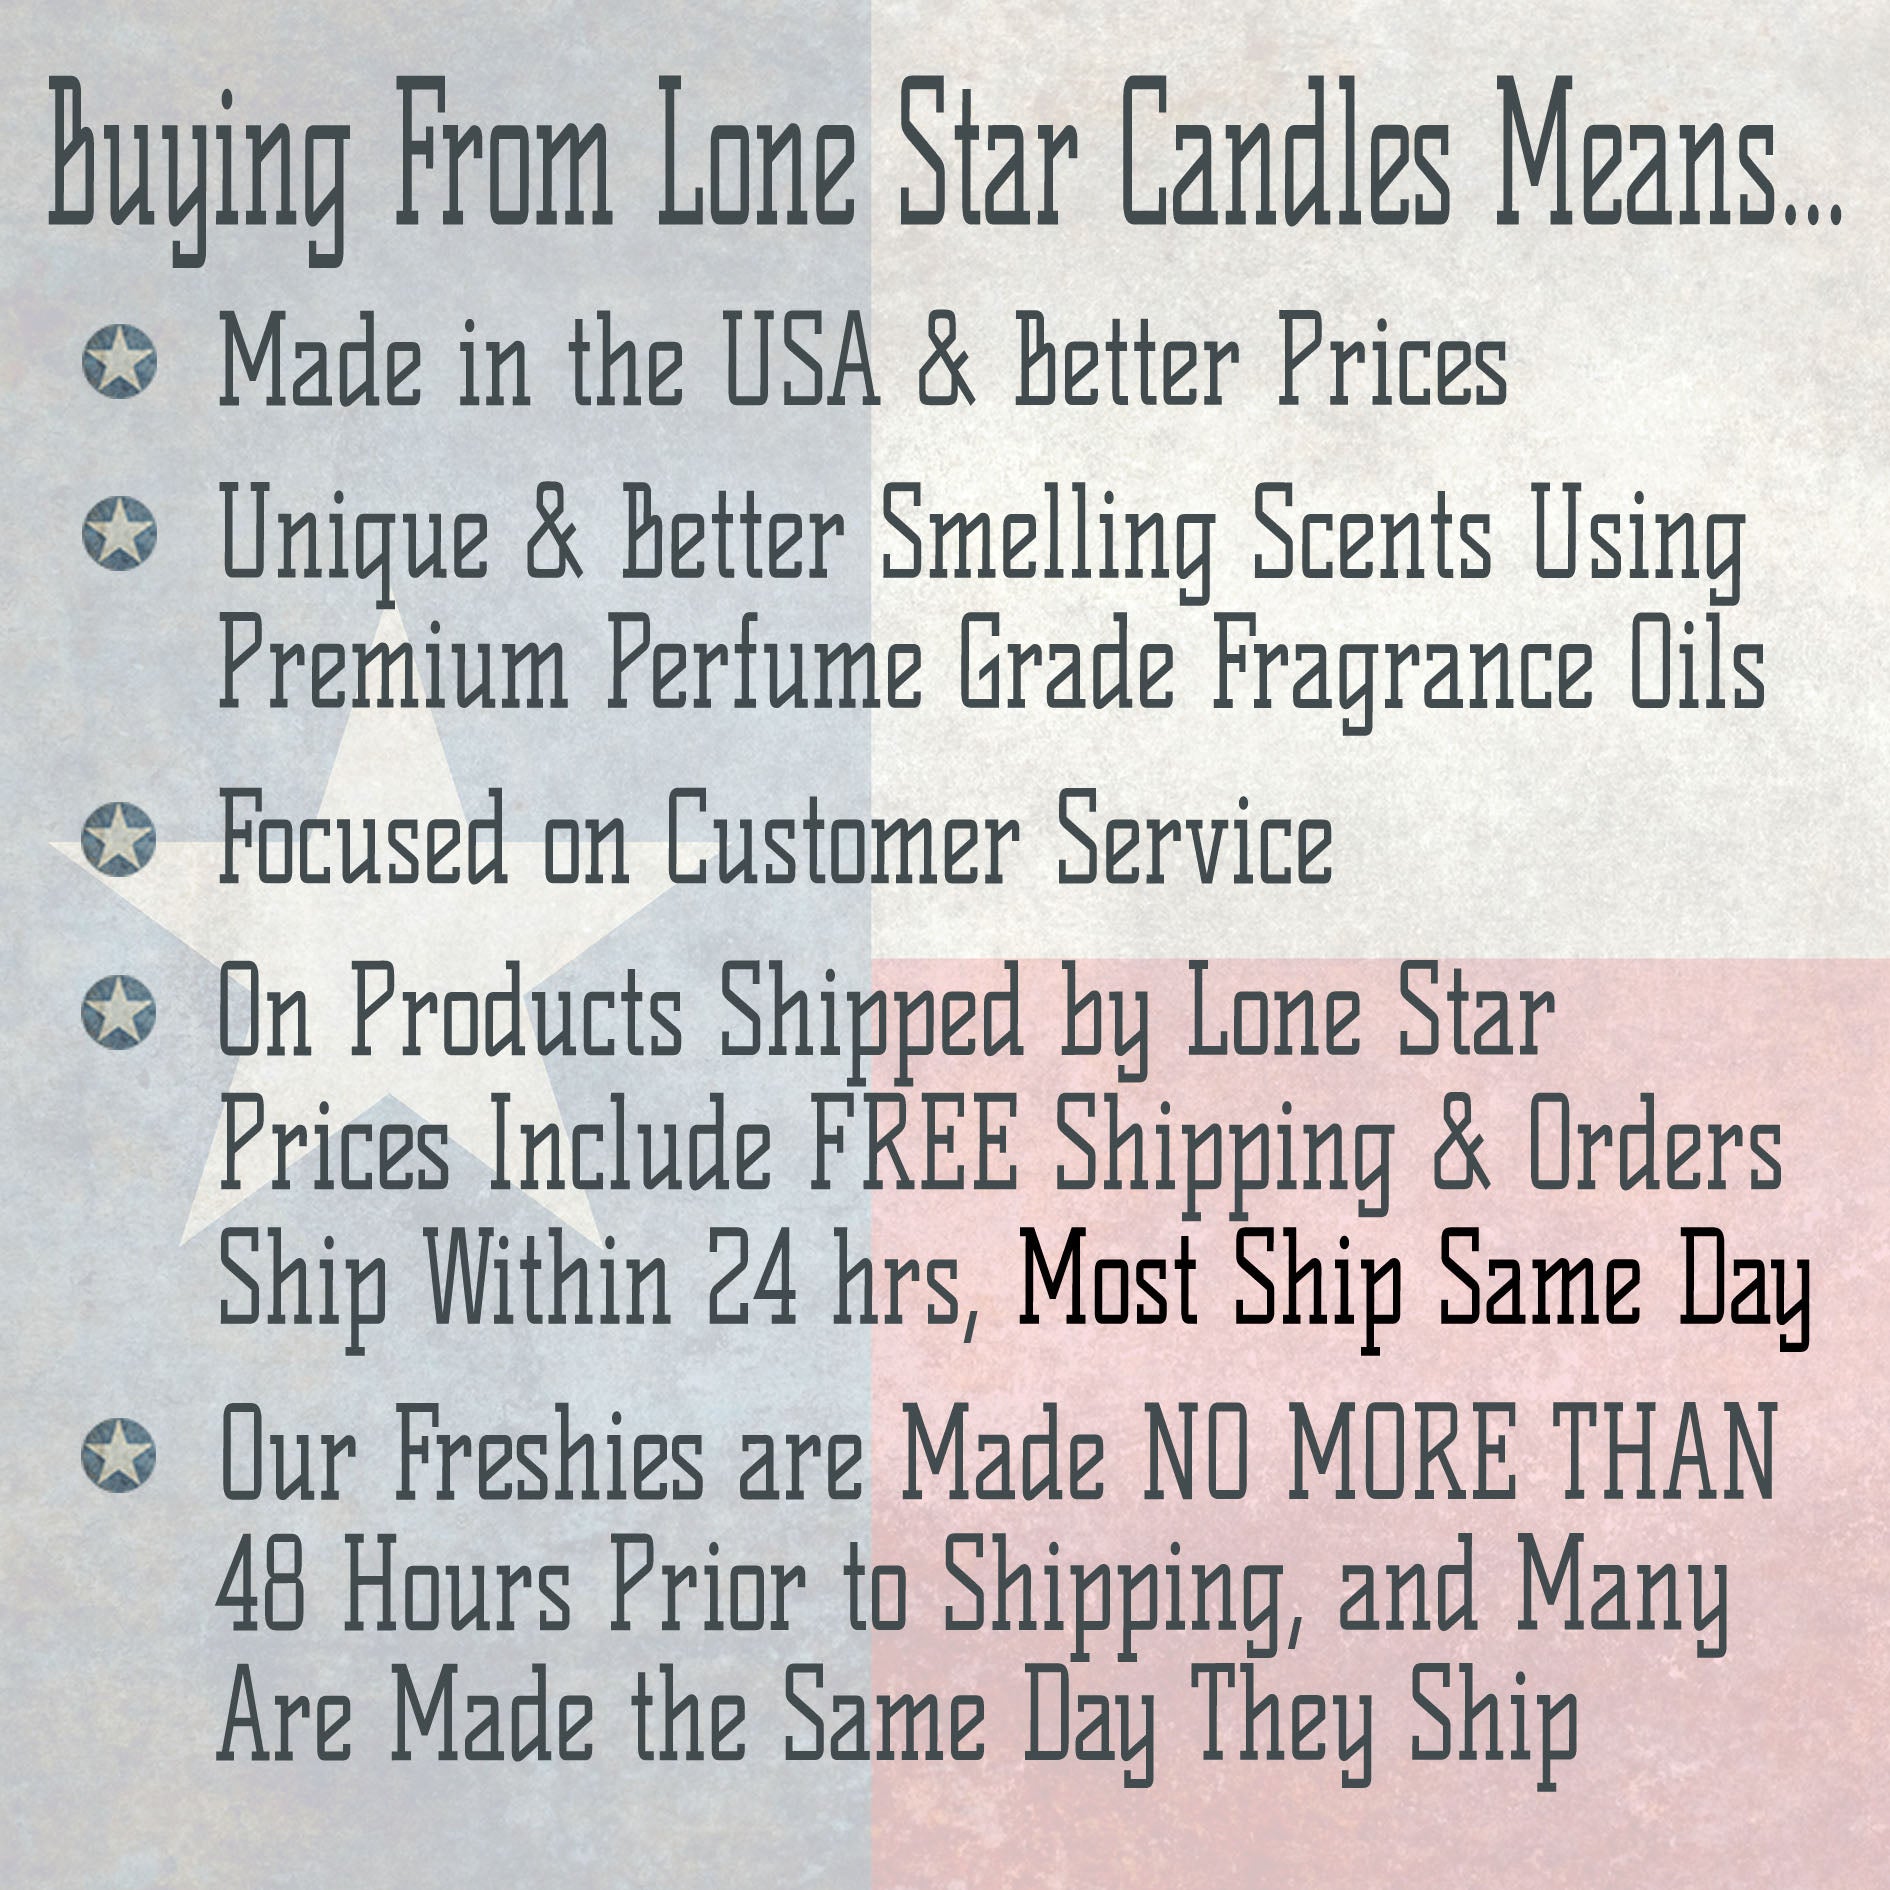 Red Hot Cinnamon, Lone Star Candles & More's Premium Strongly Scented Freshies, Red Hot Candy Like in the Theatre, Car & Air Freshener, USA Made in Texas, Gnome 1-Pack